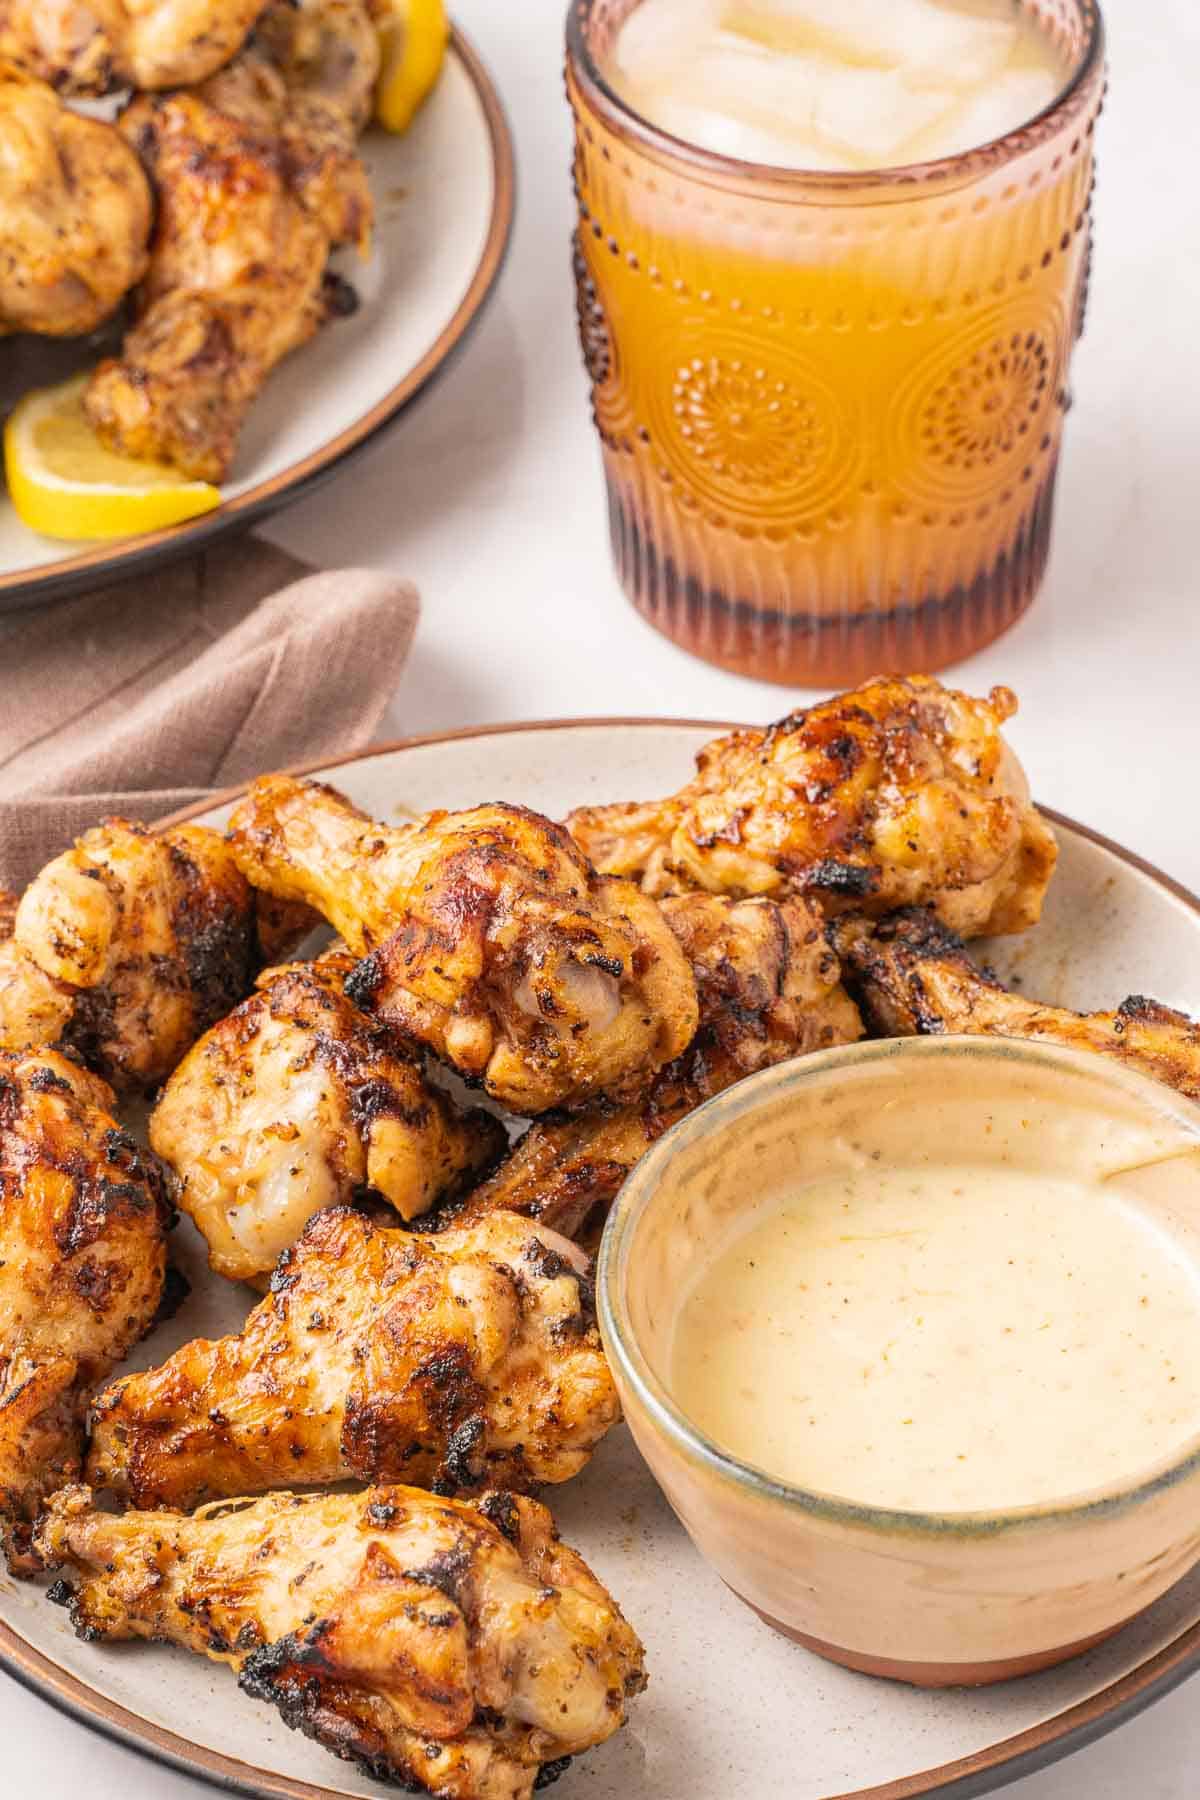 Grilled lemon pepper wings on plate with lemon sauce and glass of juice.